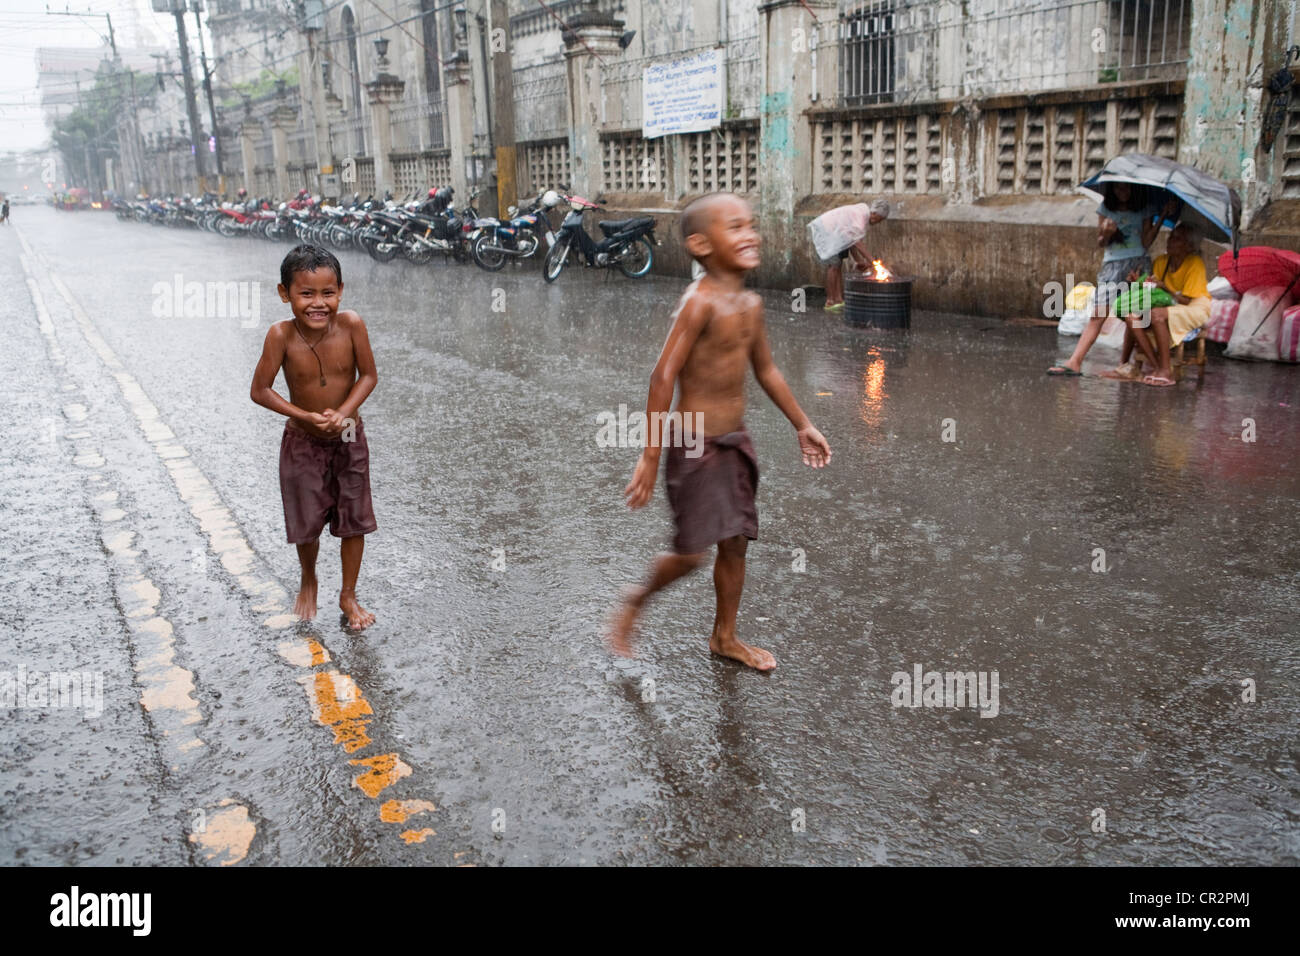 Cebu City, Philippines, 11.March 2012: Filipino kids having fun during a downpour as the raining season comes to an end. Stock Photo